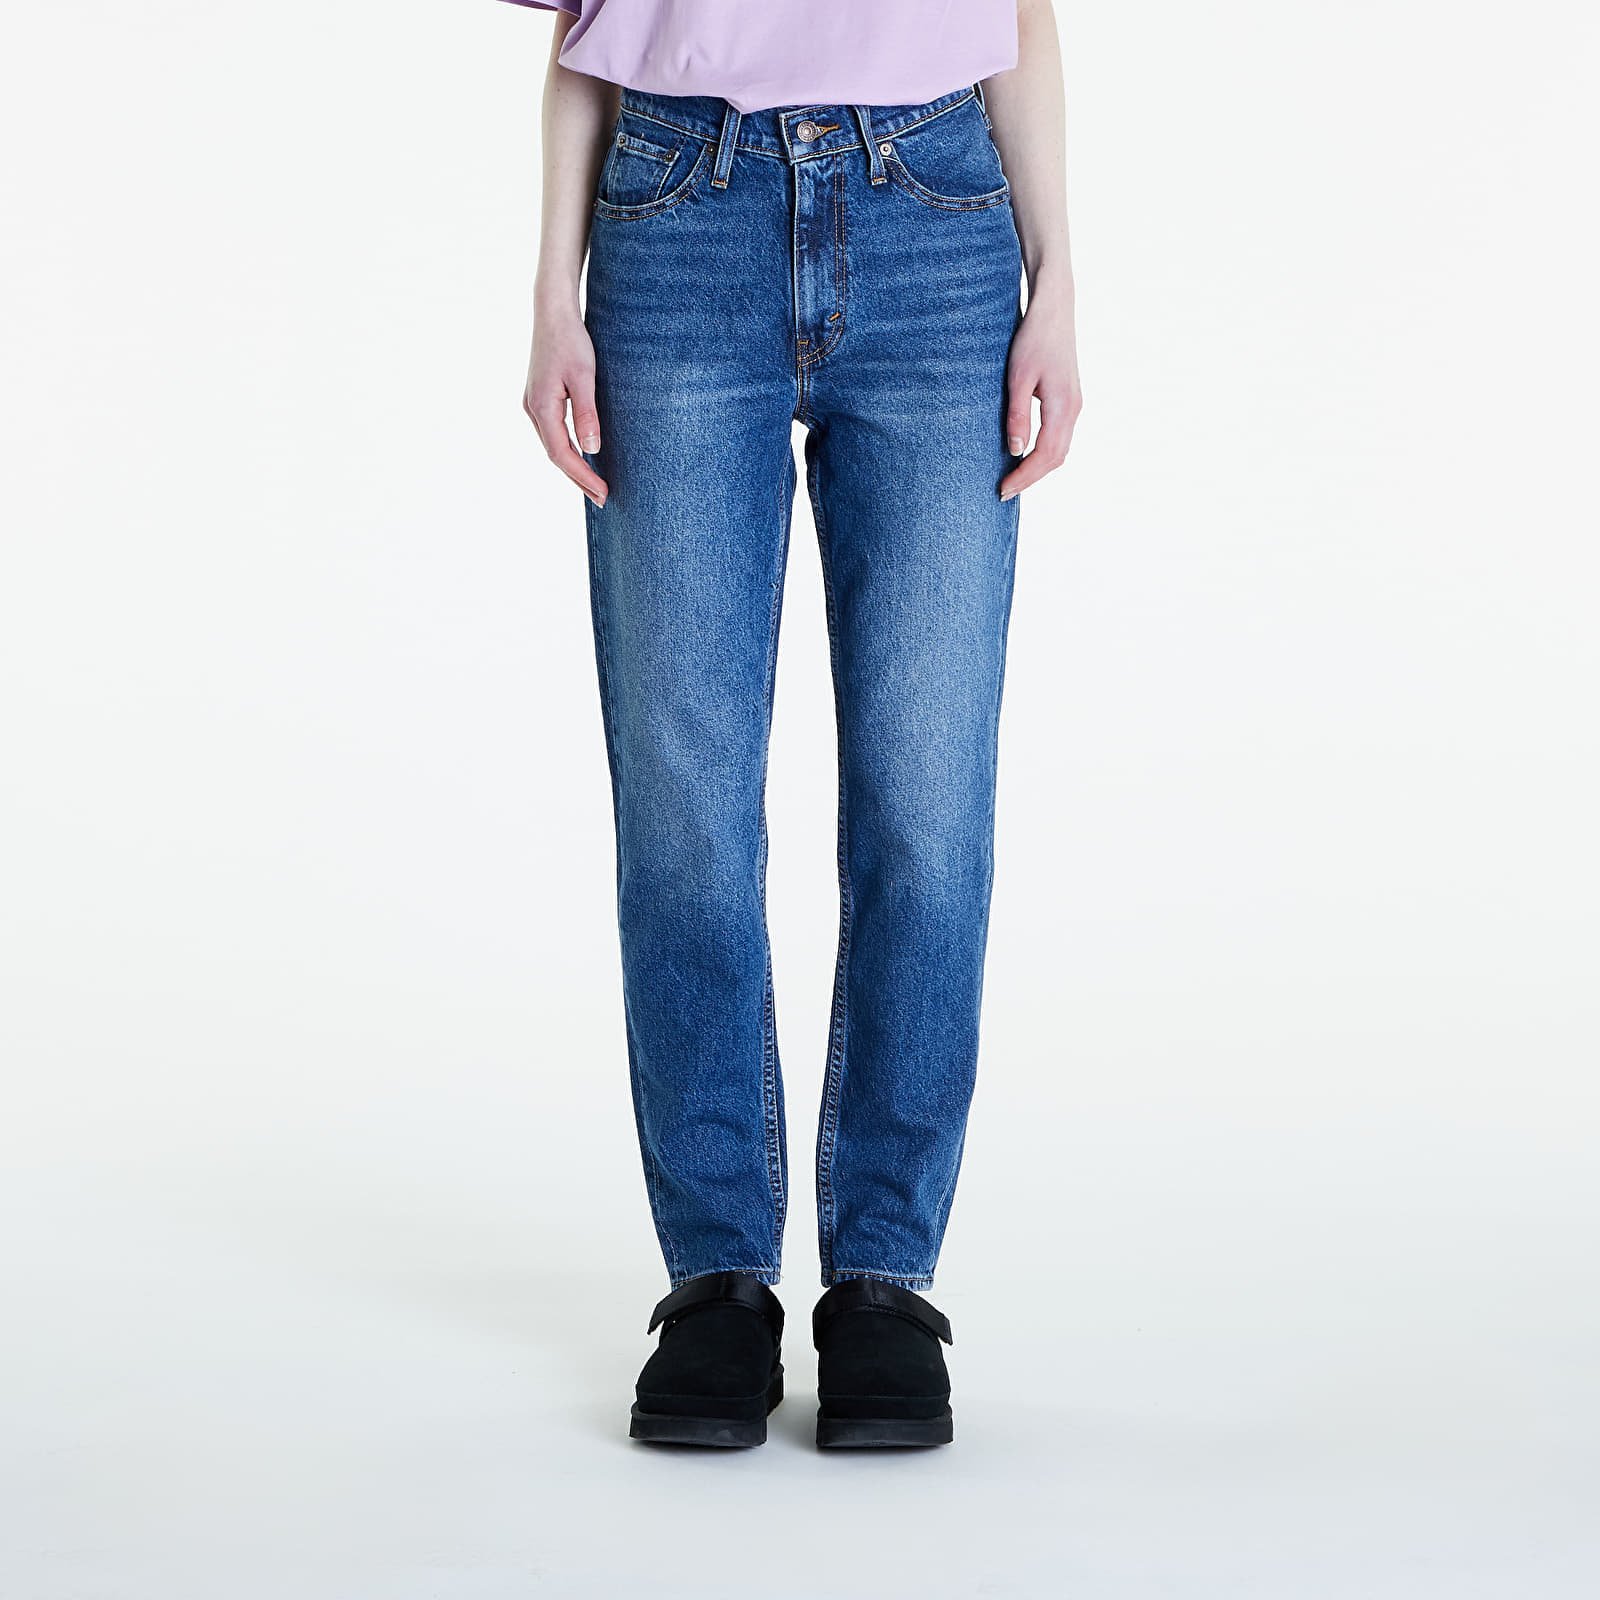 jeans ® 80's Mom Jeans Blue